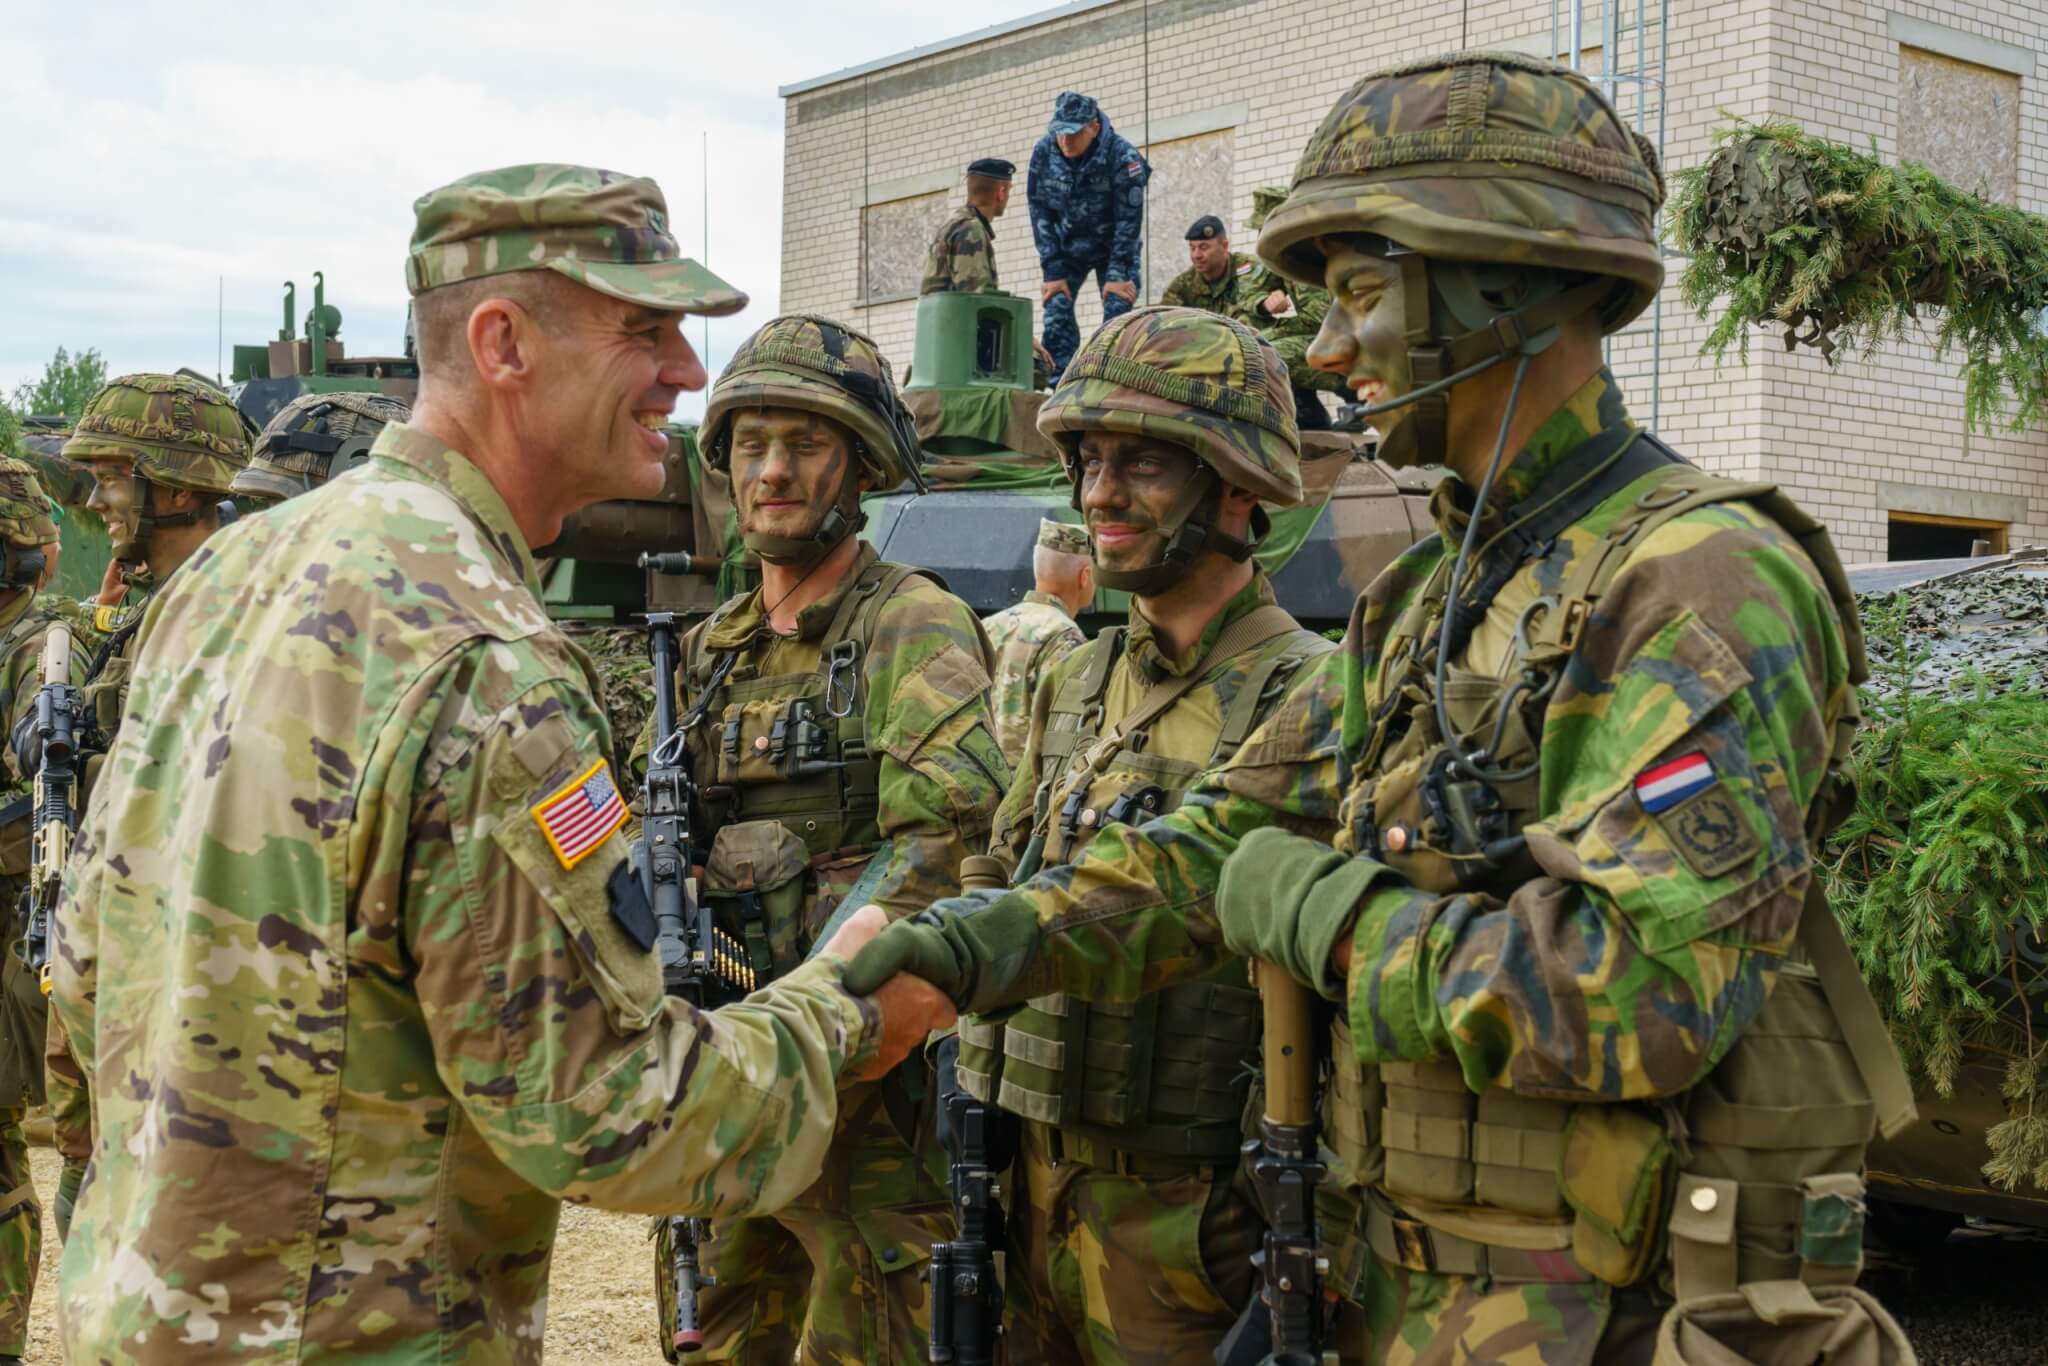 U.S. Army Maj. Gen. John Gronski, deputy commanding general, United States Army Europe, greets Dutch soldiers with the NATO enhanced forward presence battle group during Saber Strike 18 training at Pabrade Training Area, Lithuania on June 11, 2018. Saber Strike is an annual exercise in its eighth iteration that tests participants from 19 countries on their ability to work together and improve each unit’s ability to perform their designated missions. (U.S. Army photo by Sgt. Gregory T. Summers / 22nd Mobile Public Affairs Detachment)